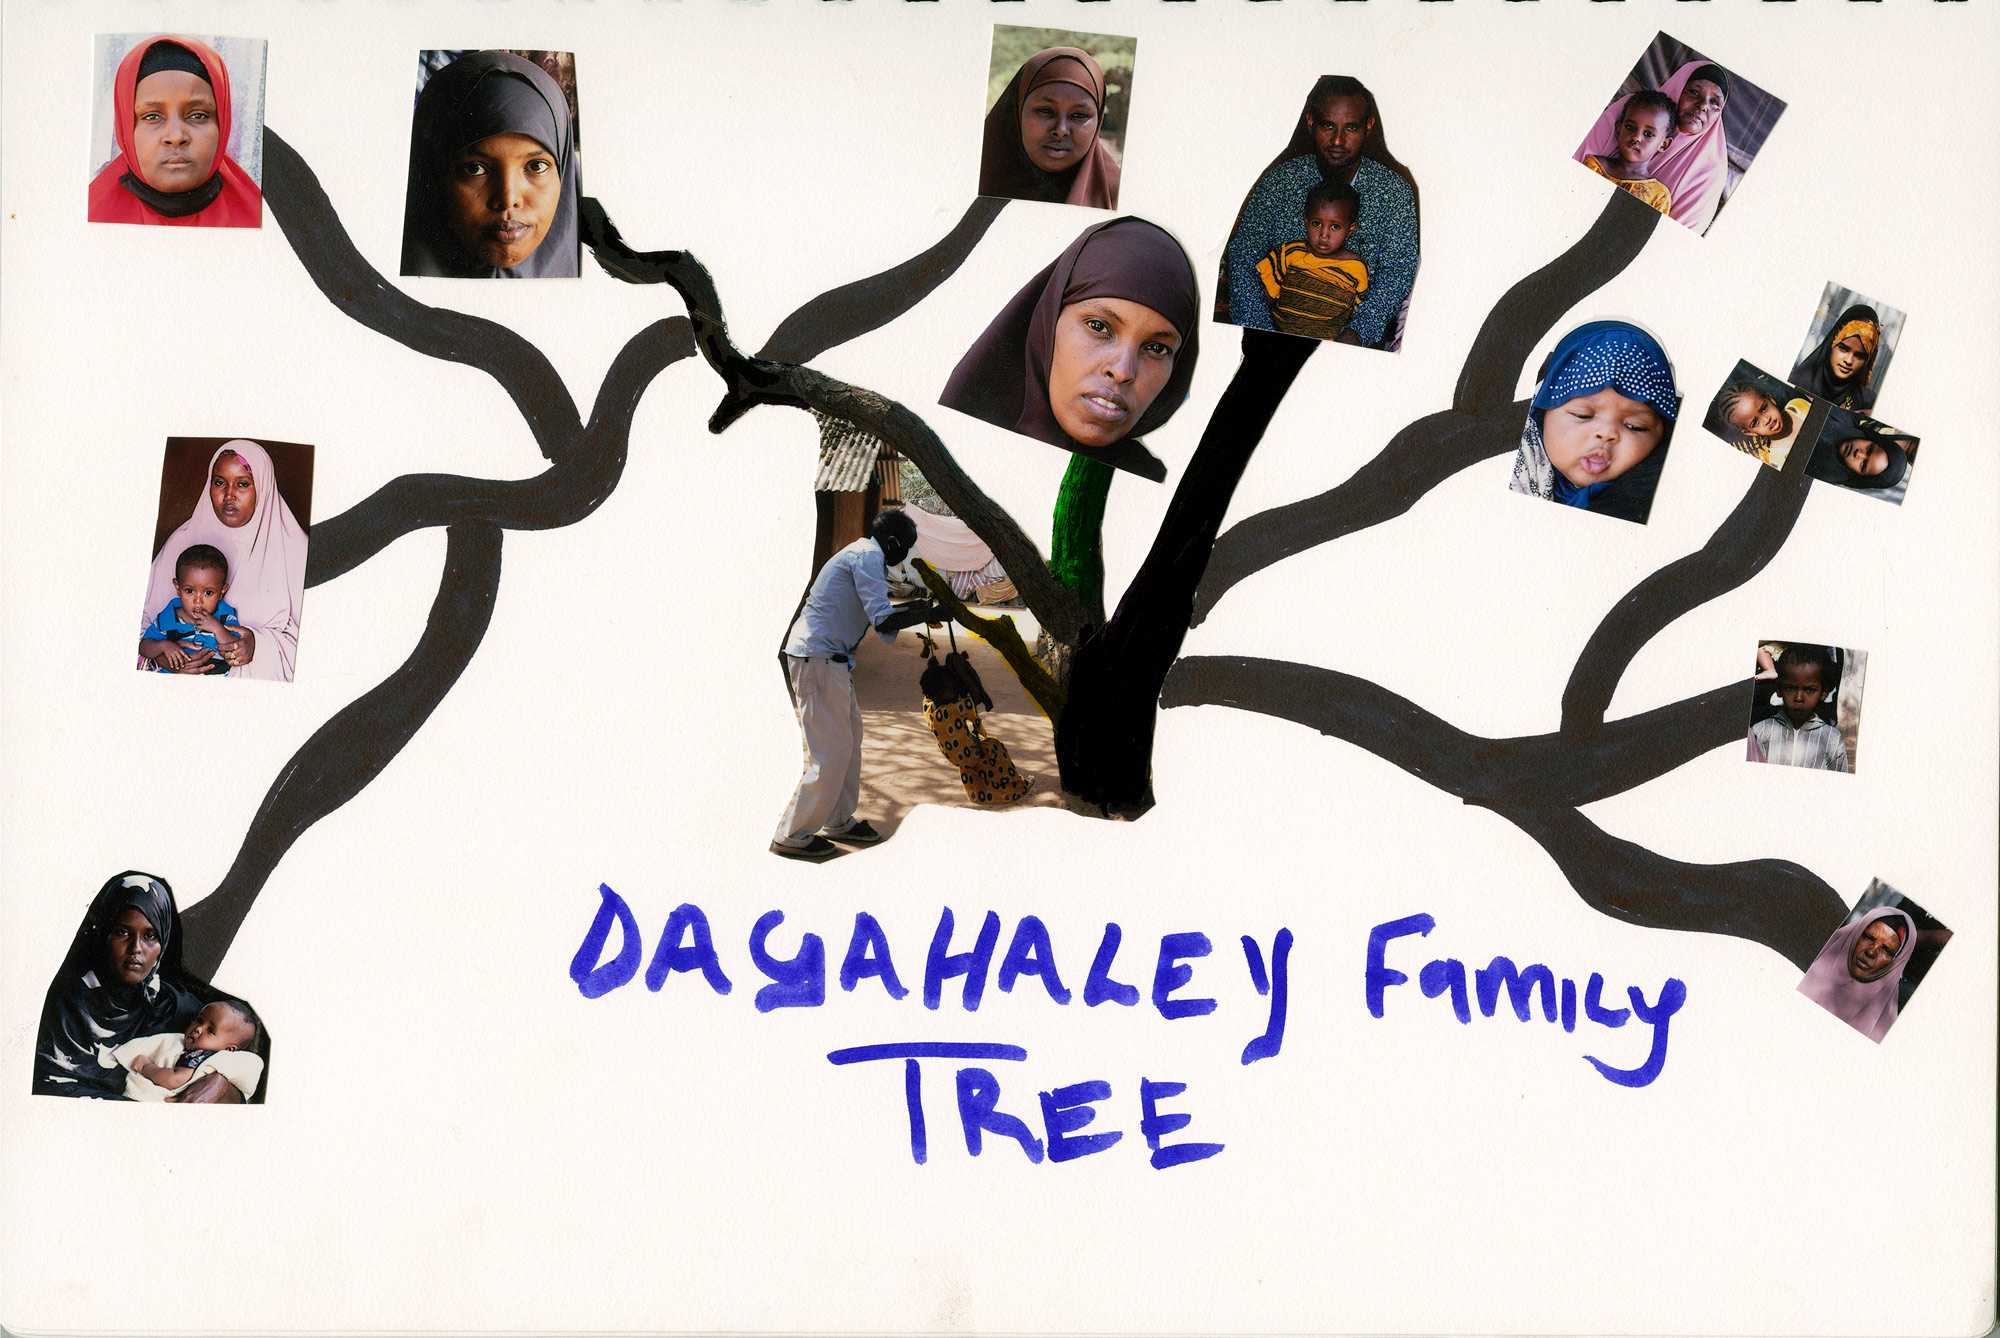 Kenya. Dadaab, Dagahaley. 29 June 2021. A collage representing the family tree of a refugee family.